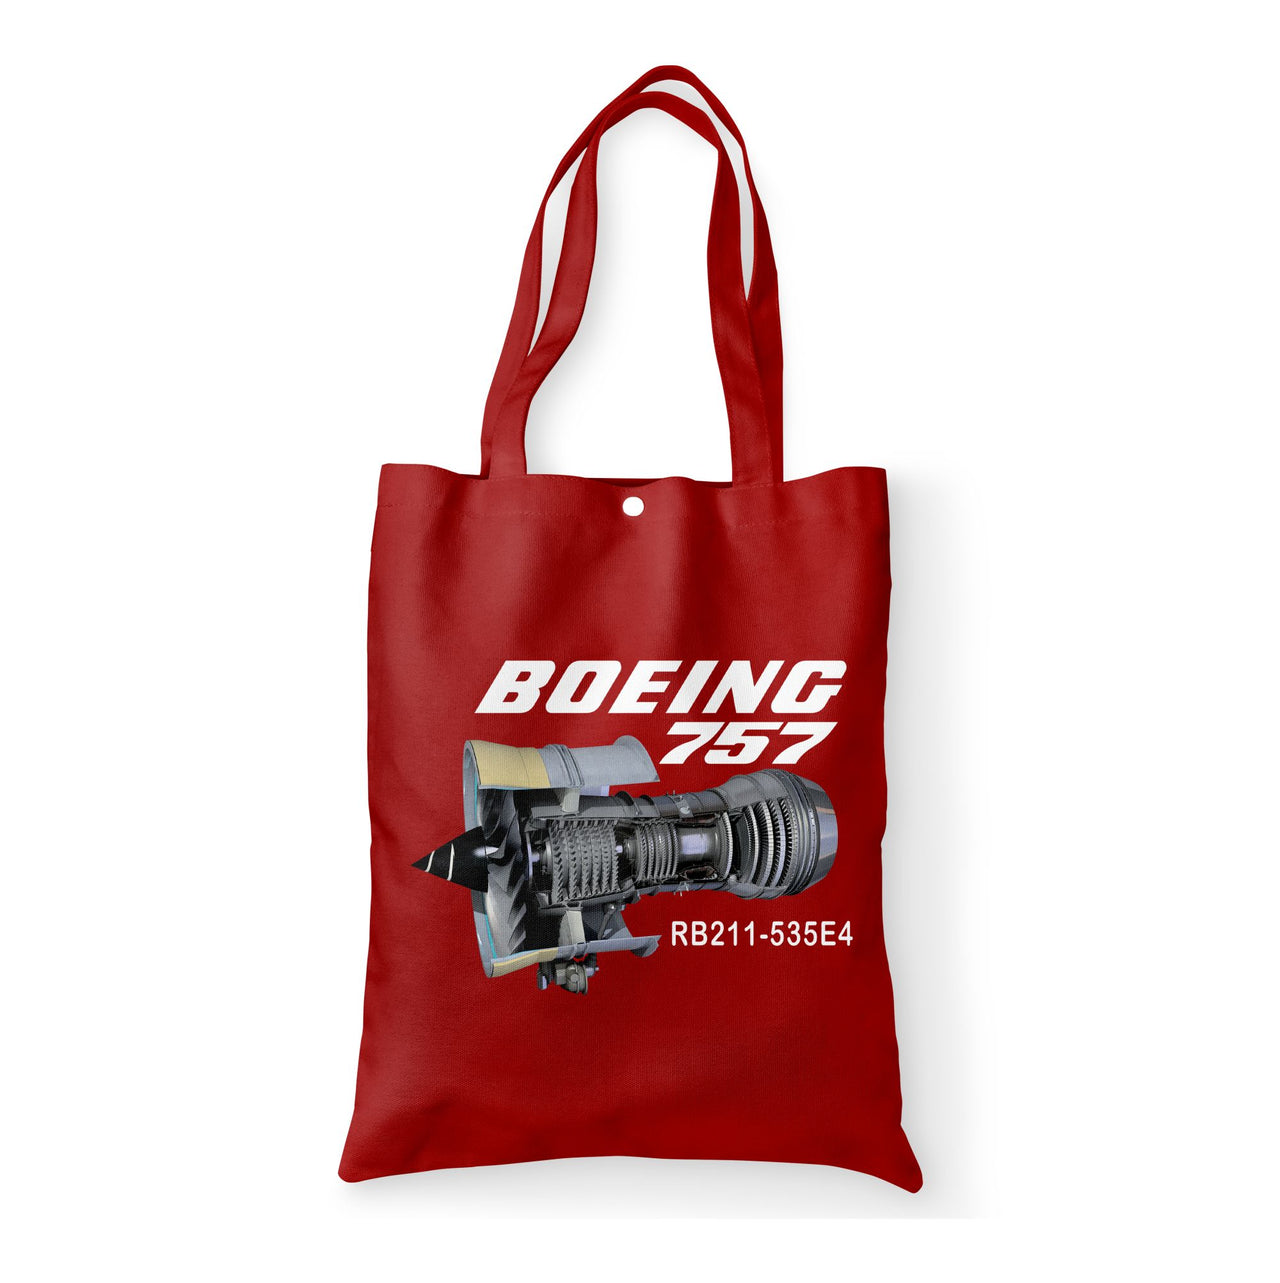 Boeing 757 & Rolls Royce Engine (RB211) Designed Tote Bags